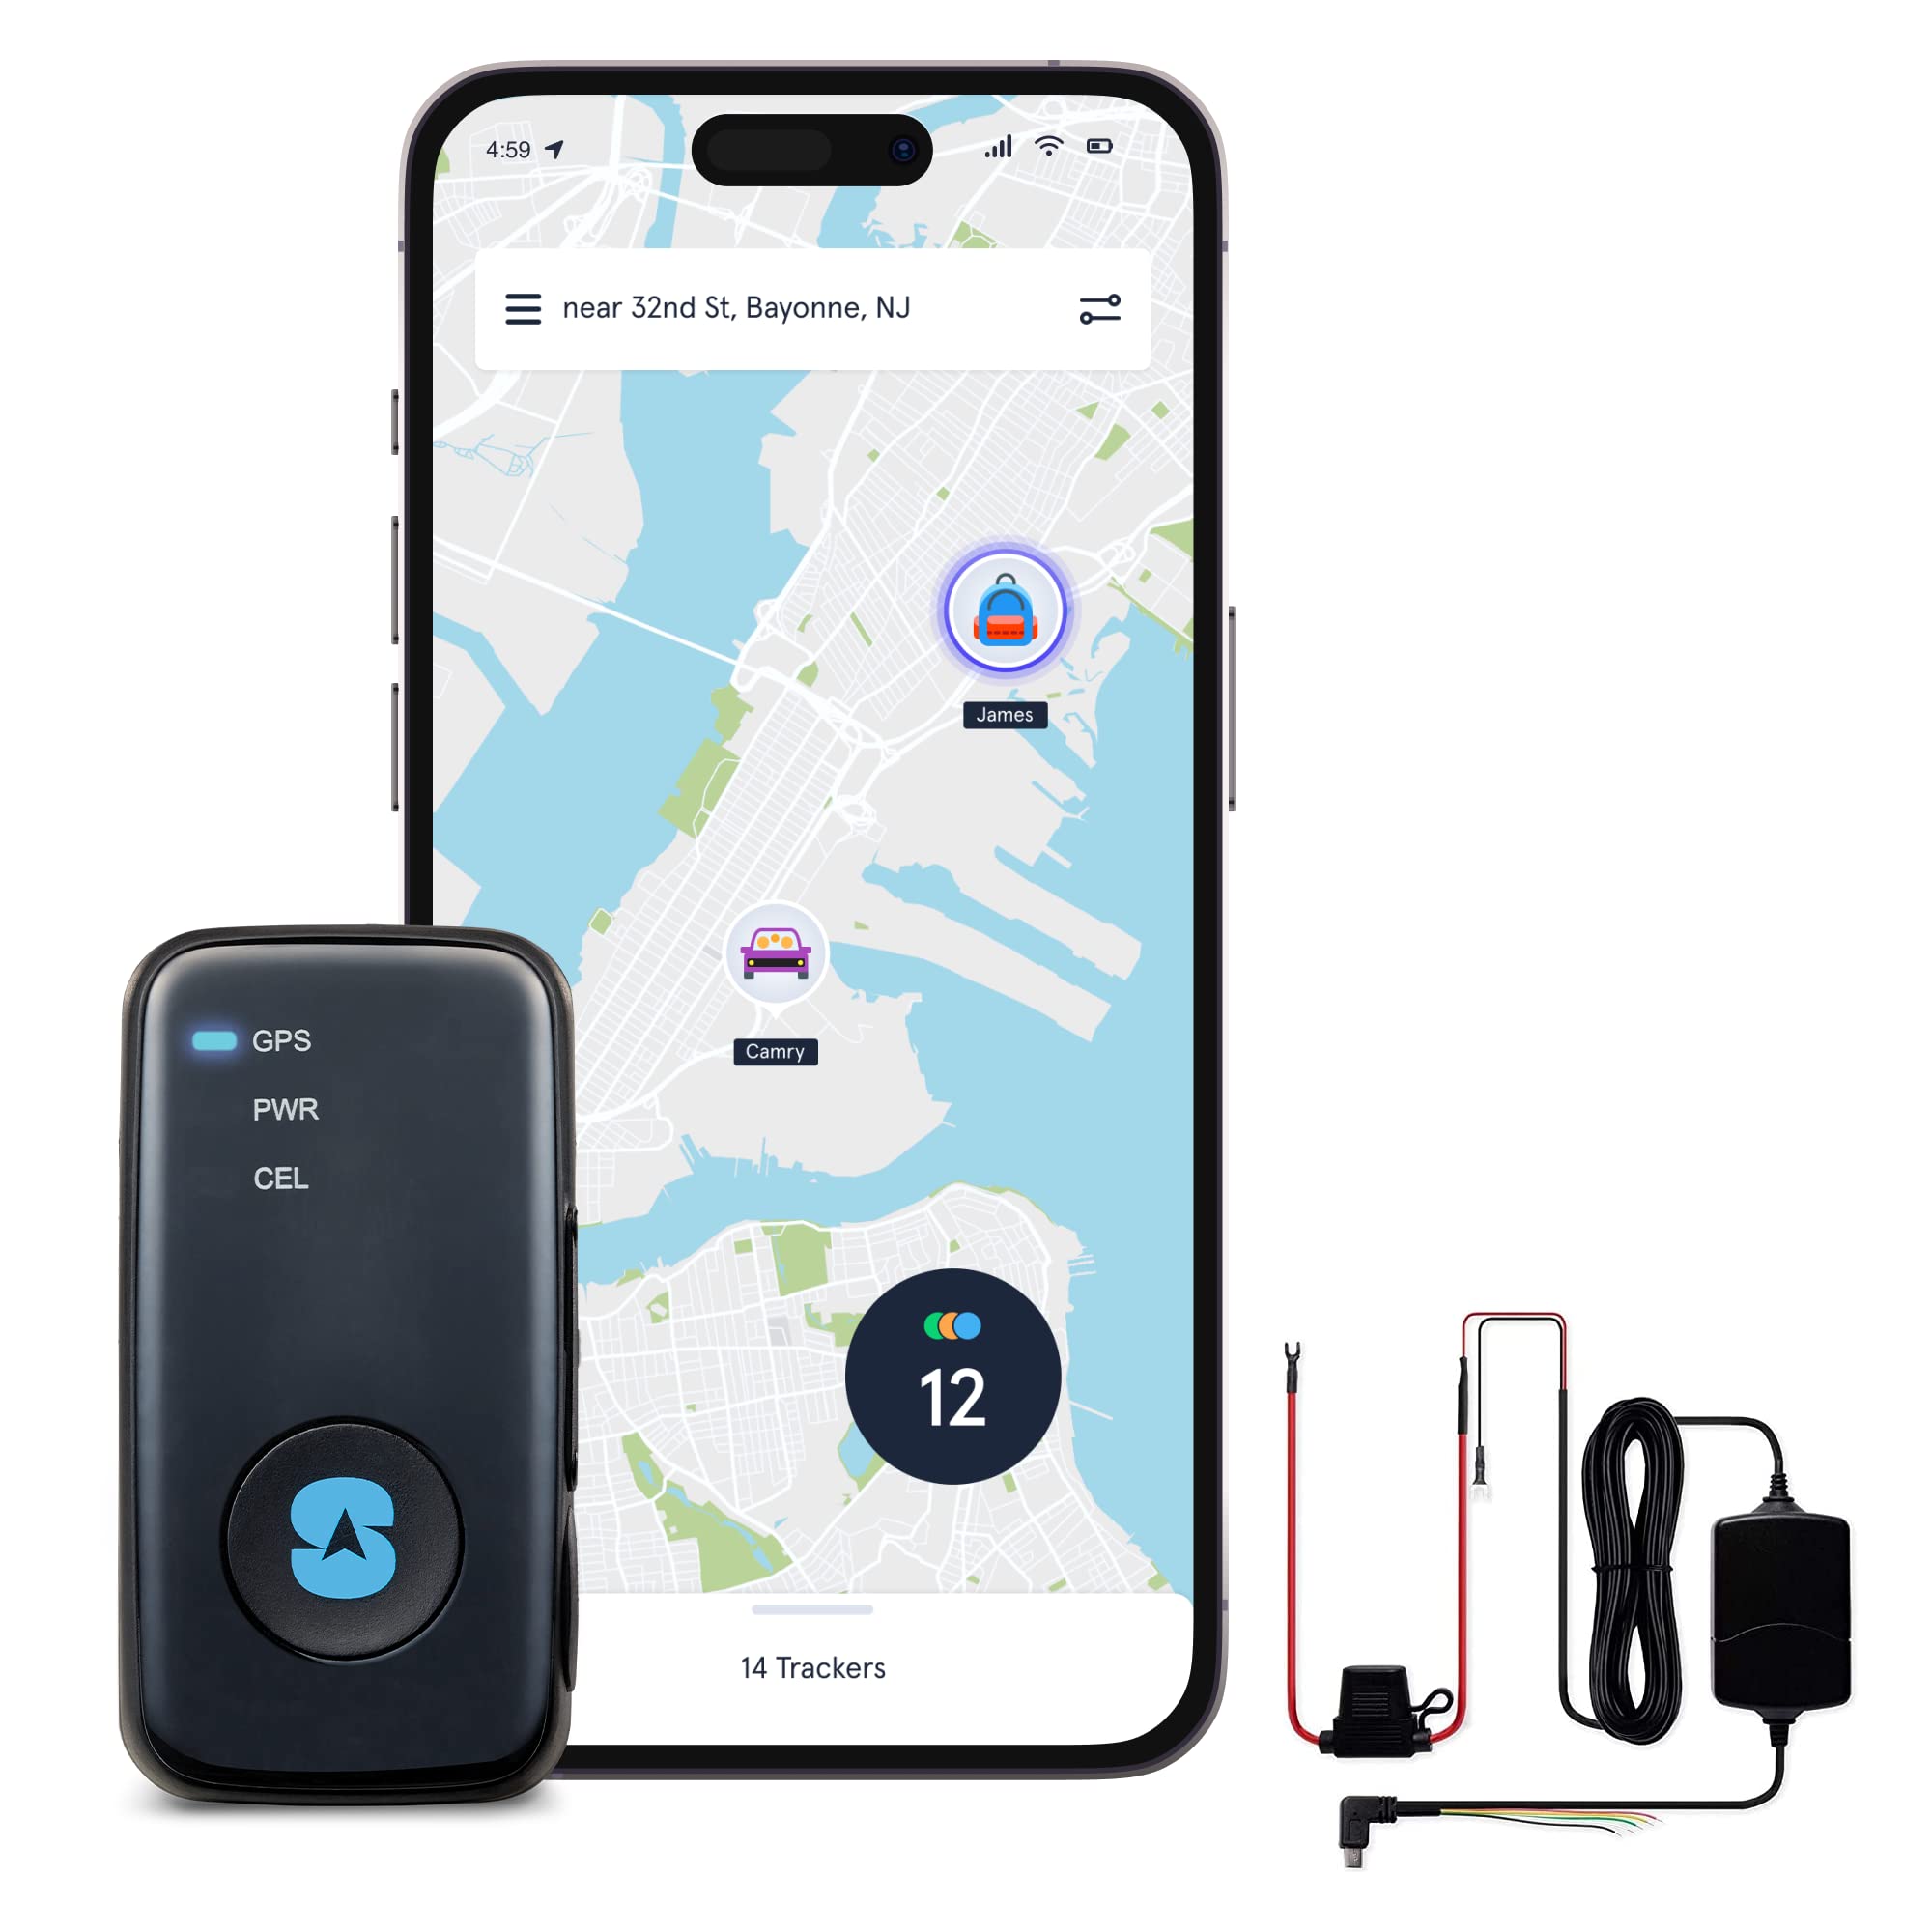 Spytec GPS GL300 and Hardwire Kit GPS Tracker for Vehicles, Cars, Trucks, Motorcycles, Loved Ones and Asset Tracker with Unlimited US and Worldwide Real-Time Tracking App - Subscription Required